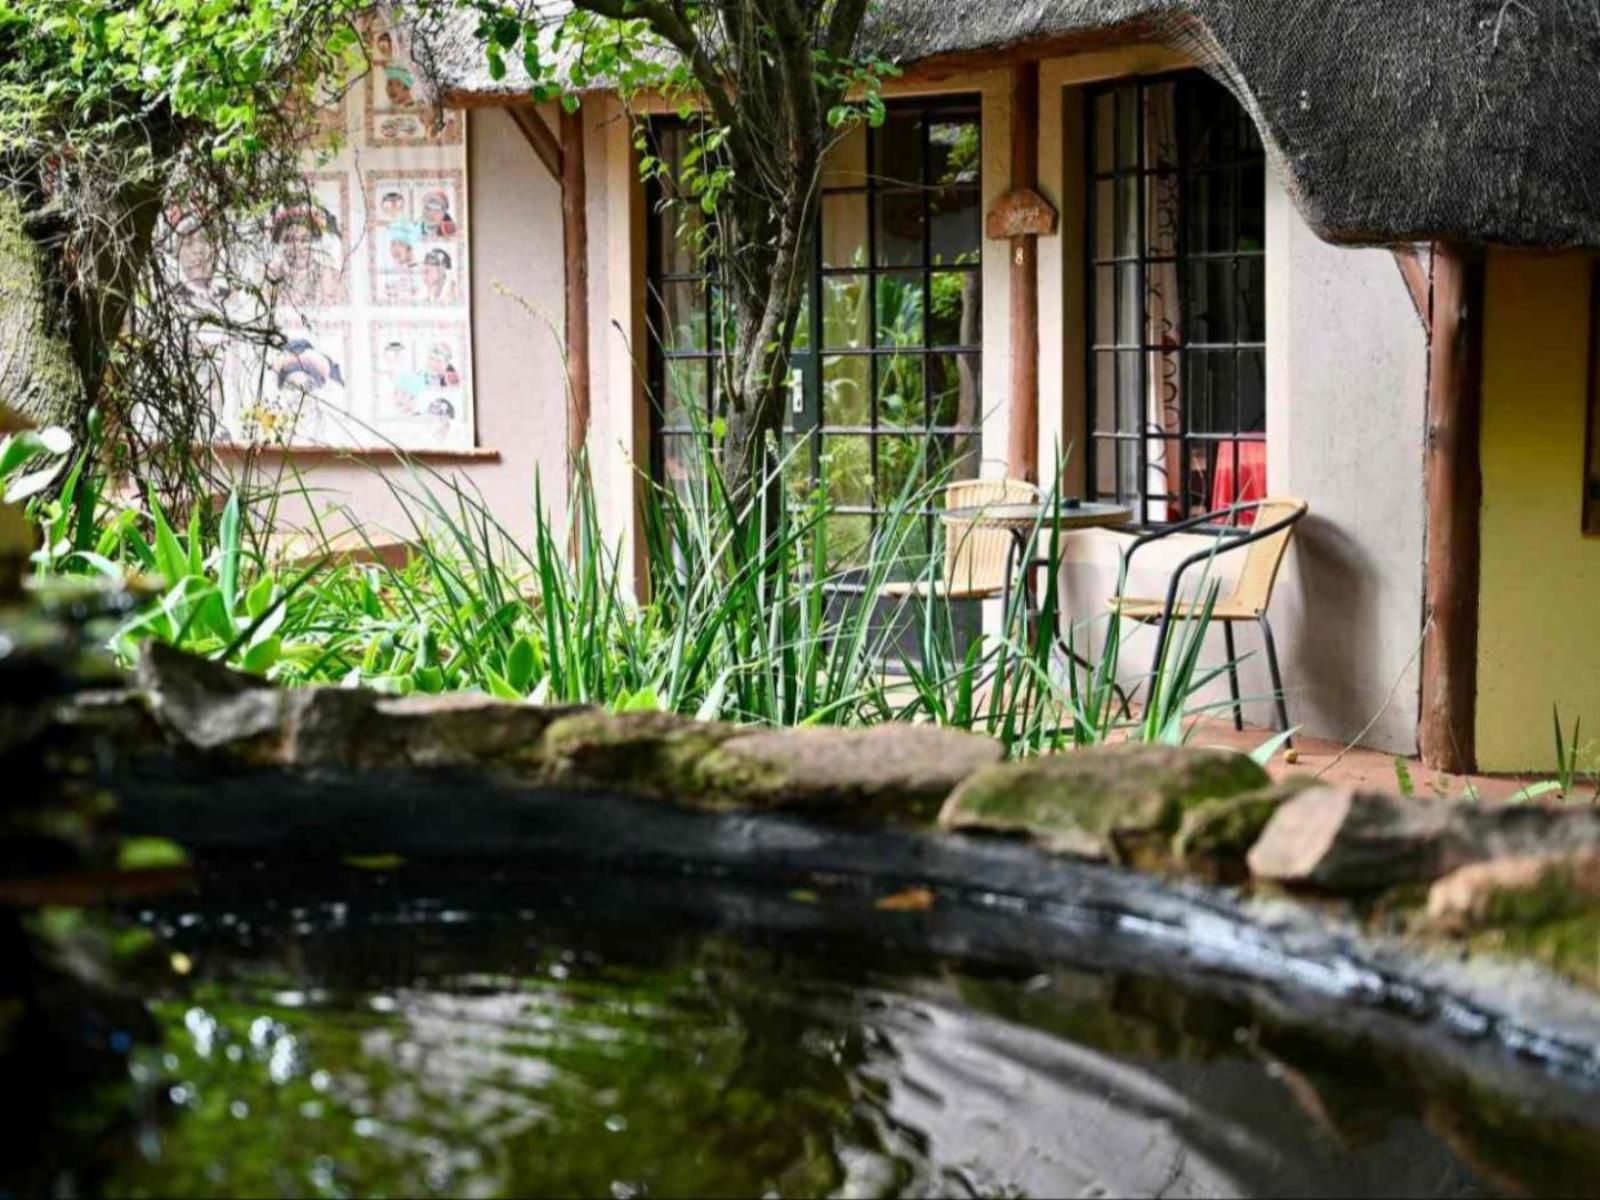 Kulanga Cottages Bed And Breakfast Linden Johannesburg Gauteng South Africa House, Building, Architecture, Garden, Nature, Plant